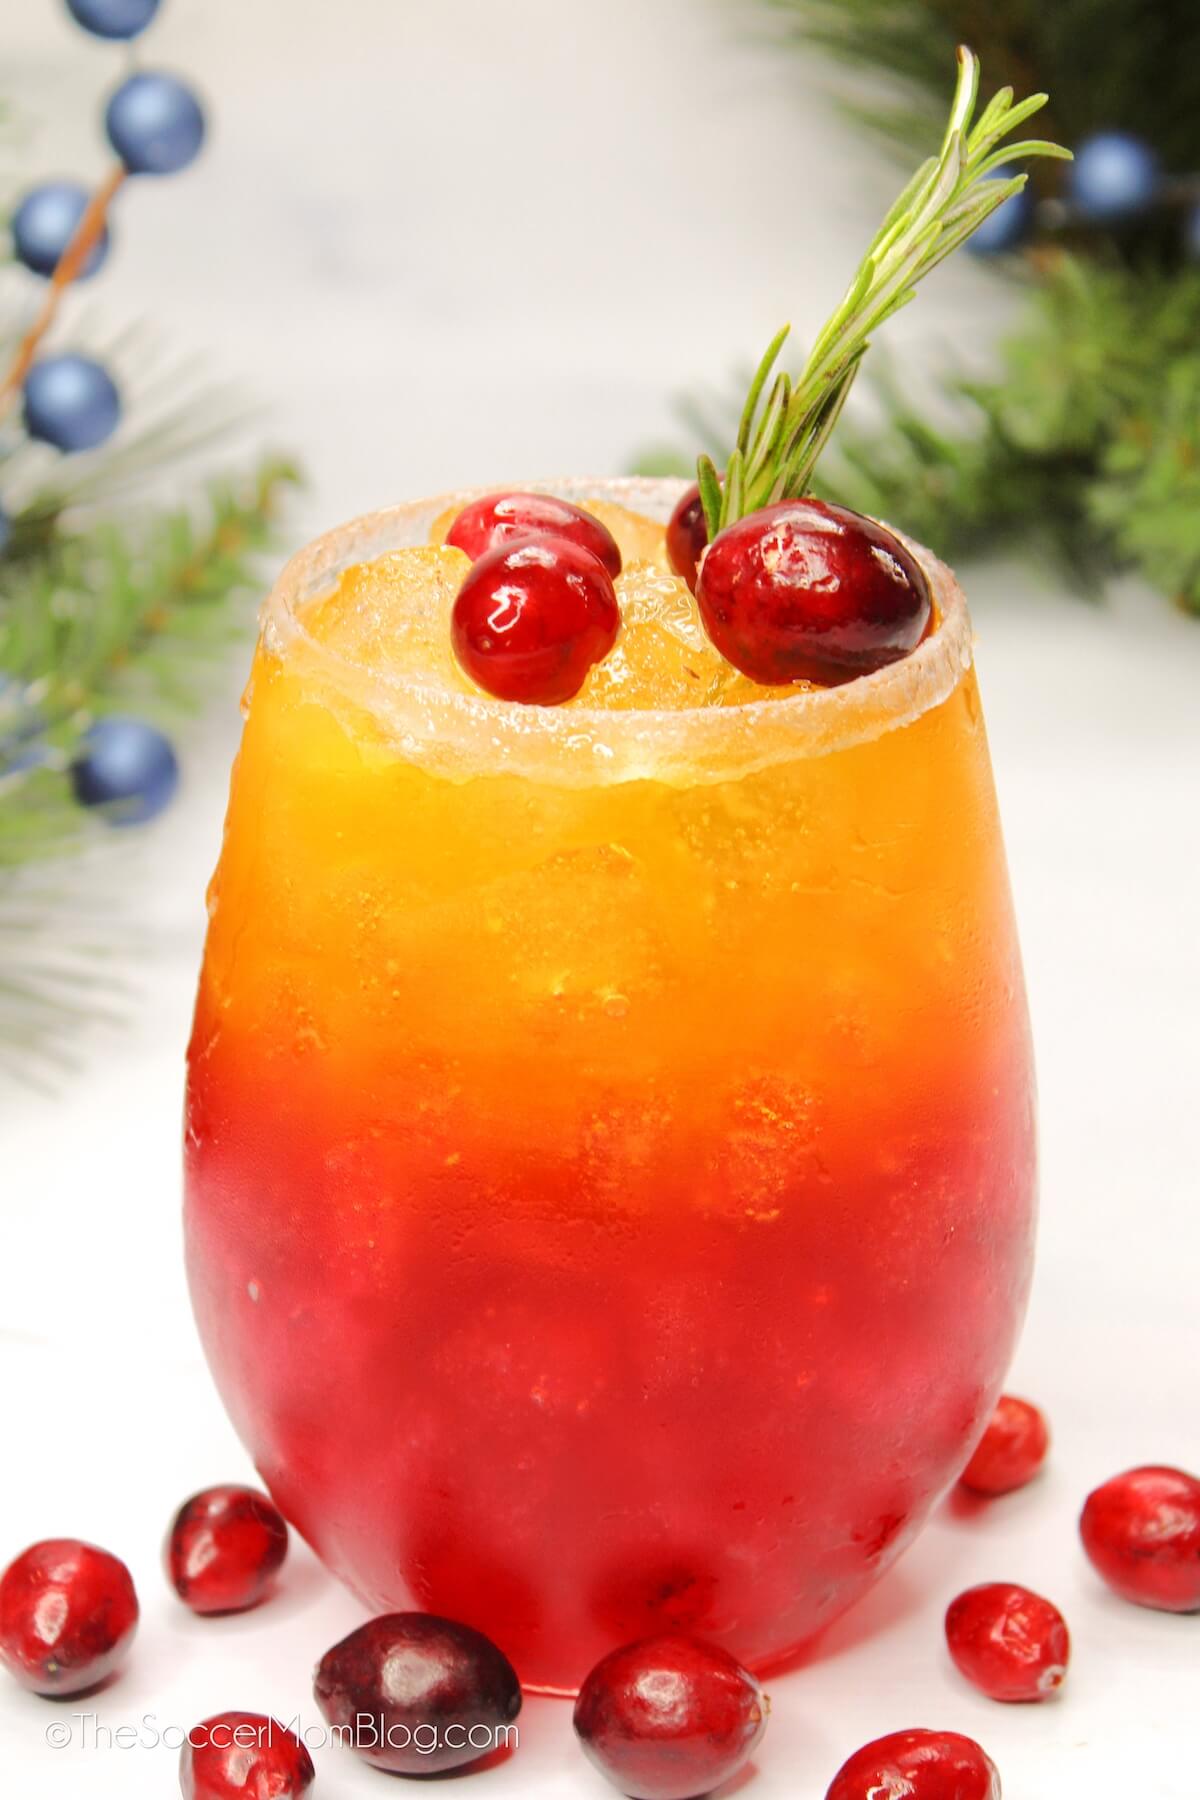 close up of a red and gold layered holiday drink, topped with cranberries.